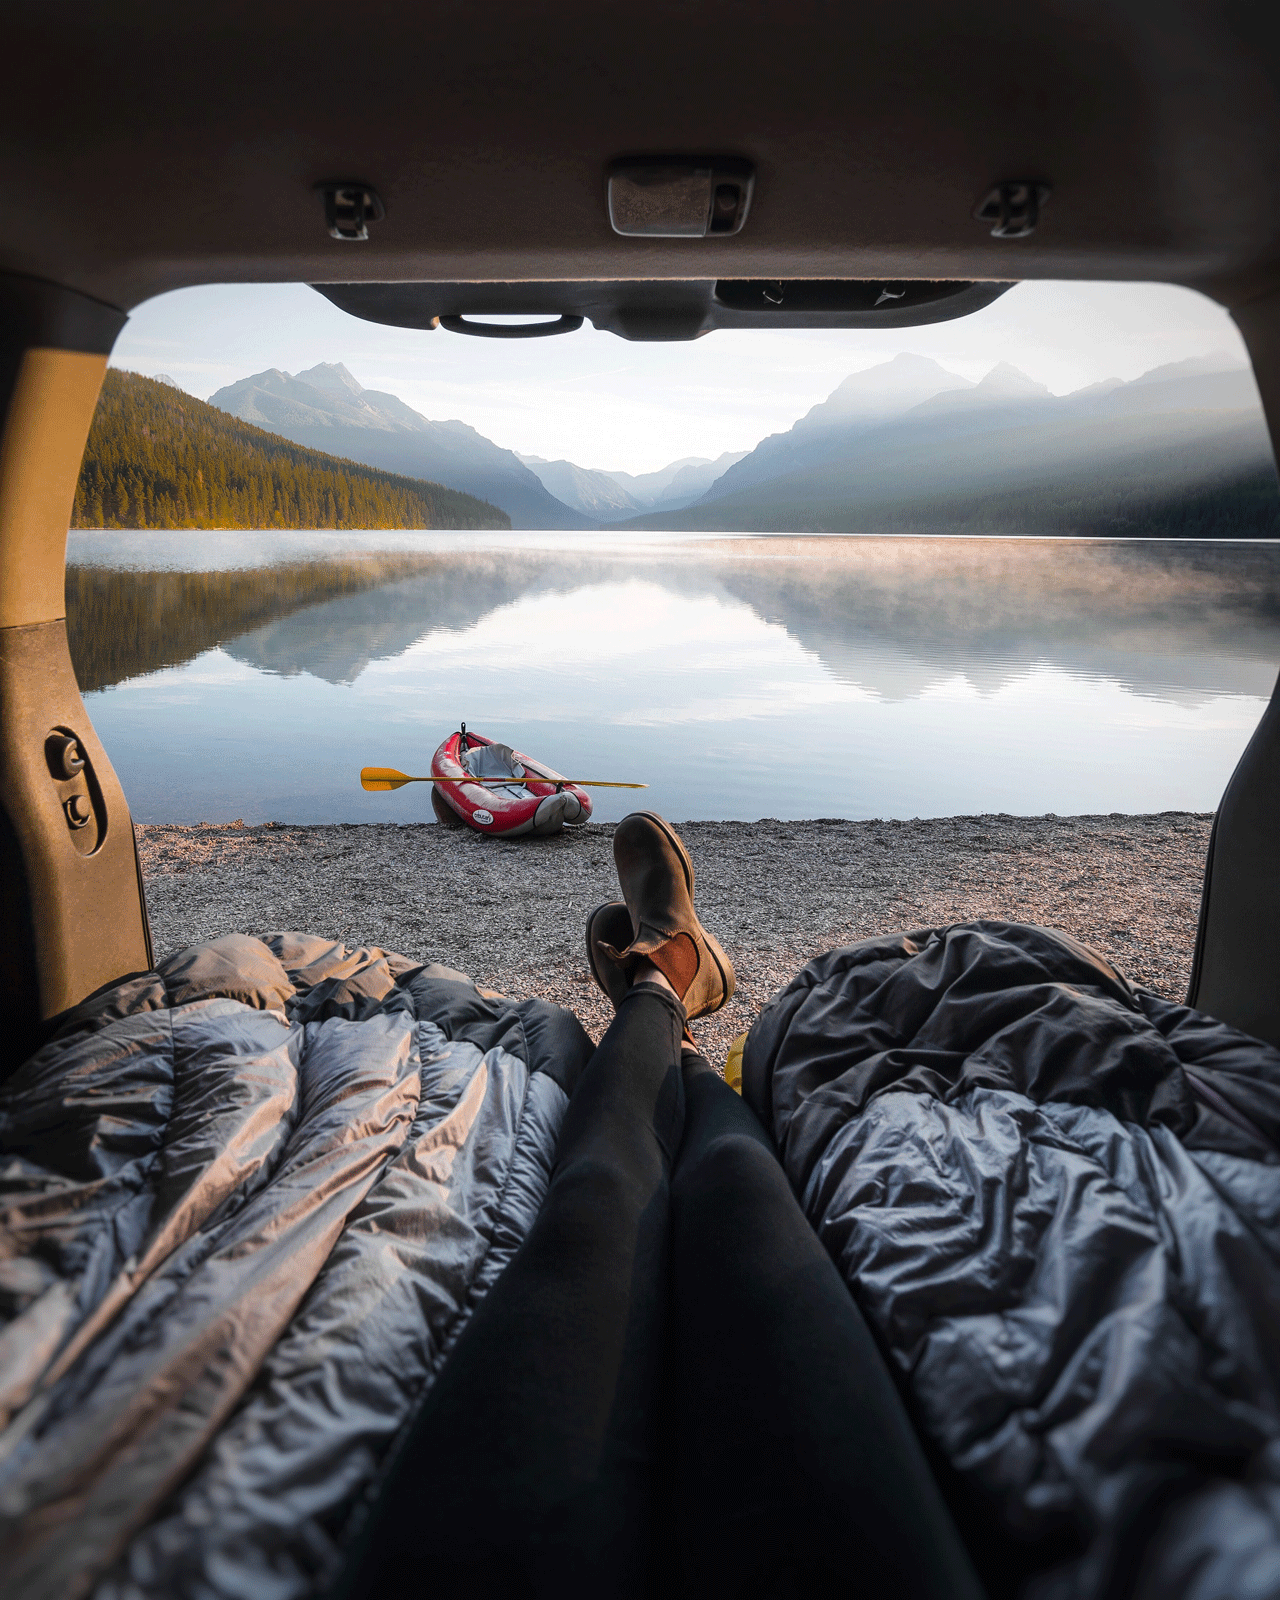 A person is lying in the back of a car with the trunk open, looking out at a serene lake surrounded by mountains. A kayak with a paddle is on the shore near the water. It's a peaceful outdoor scene with mist over the lake.